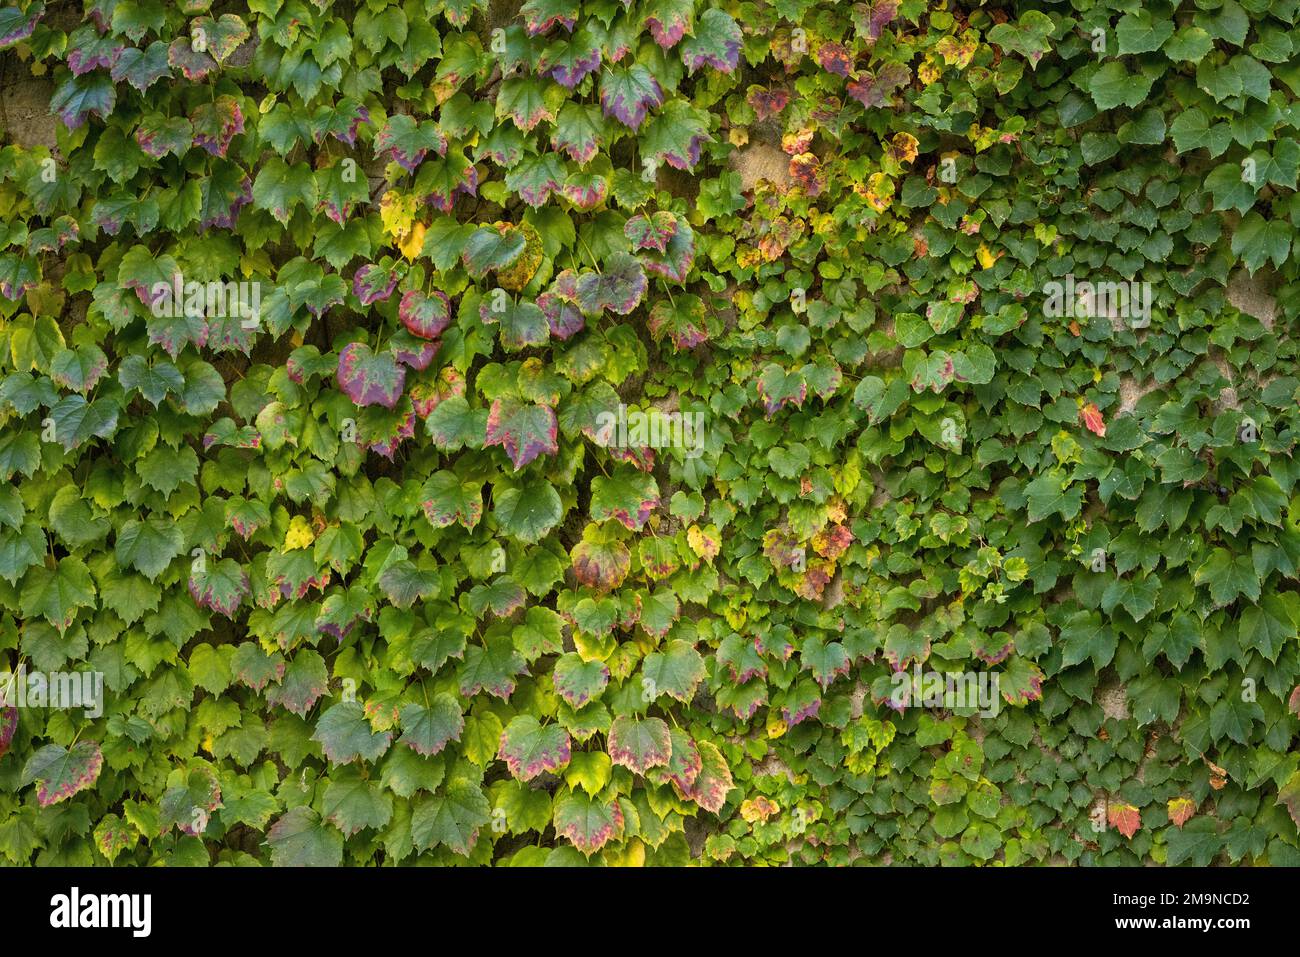 Ivy growing on a wall Stock Photo